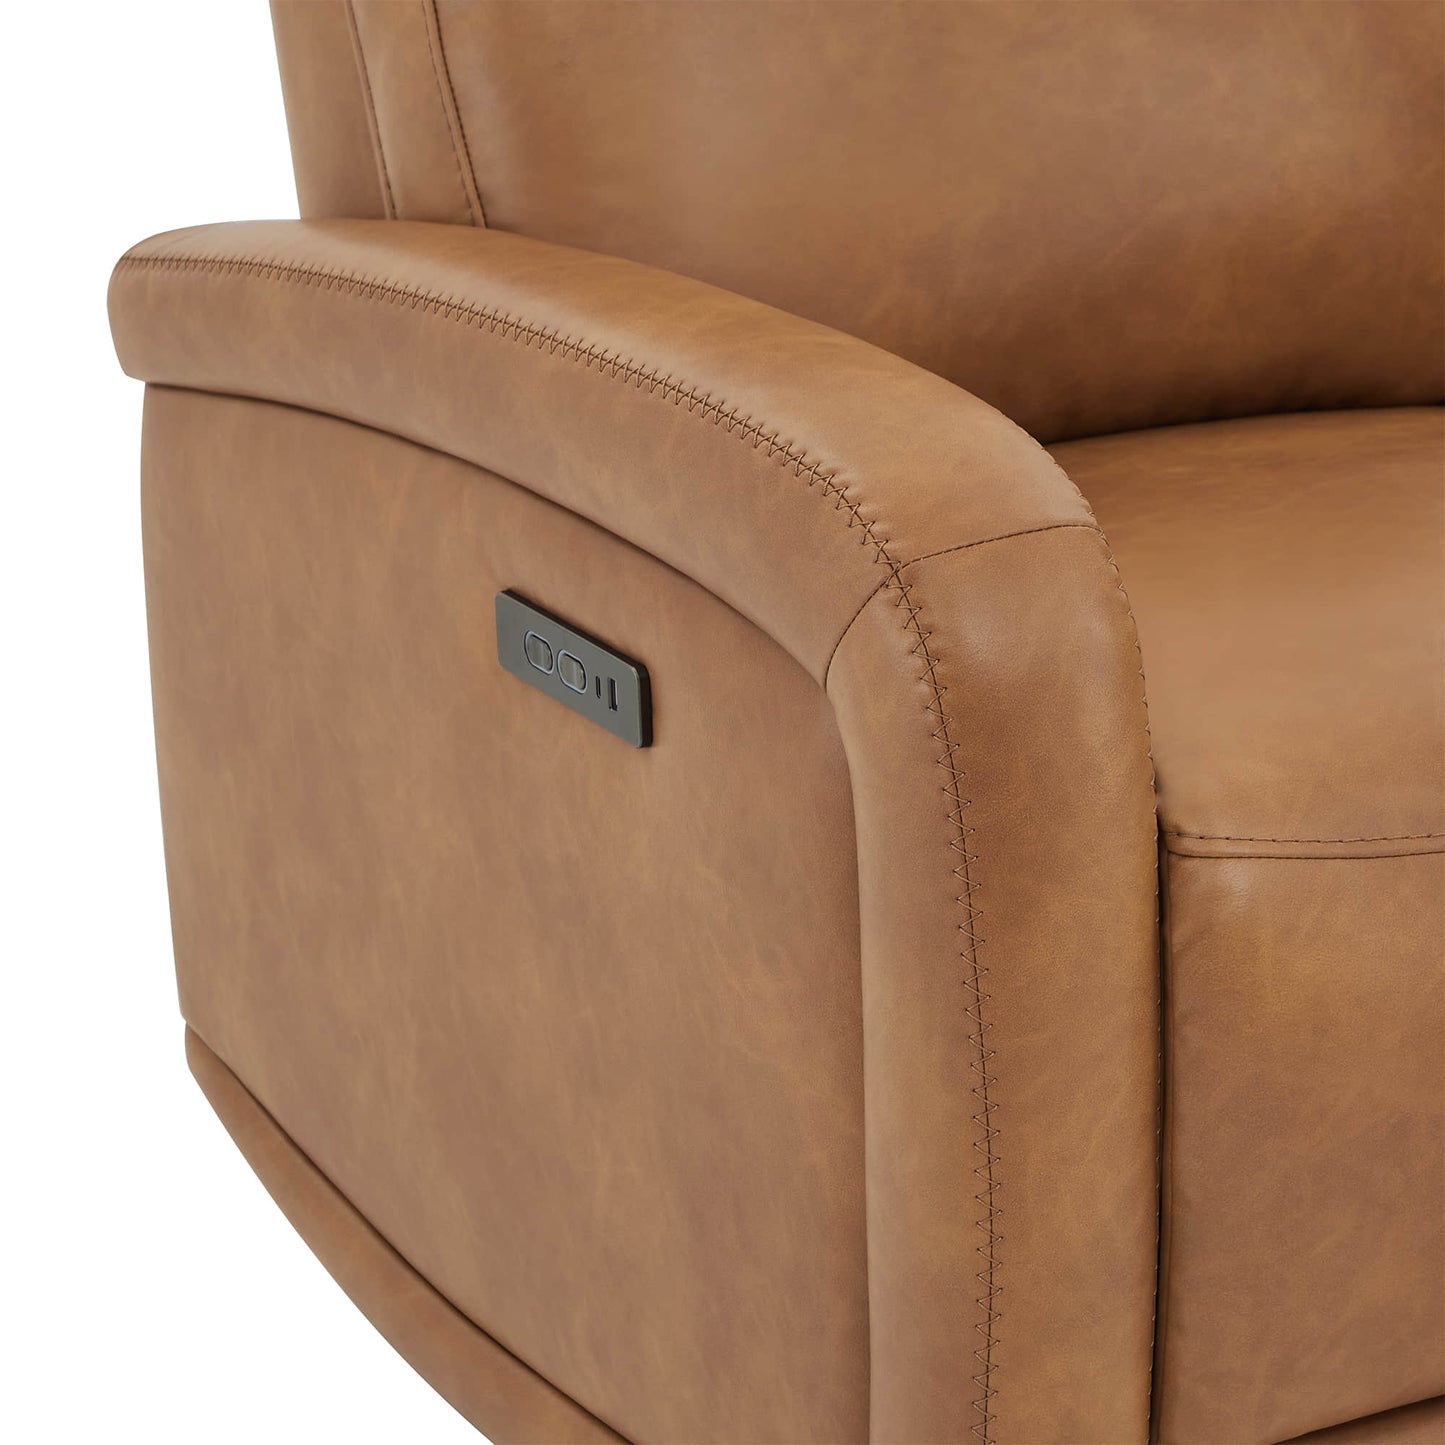 CHITA LIVING-Keni Power Wall Hugger Recliner with Type-C Port-Recliners-Faux leather-Cognac Brown-